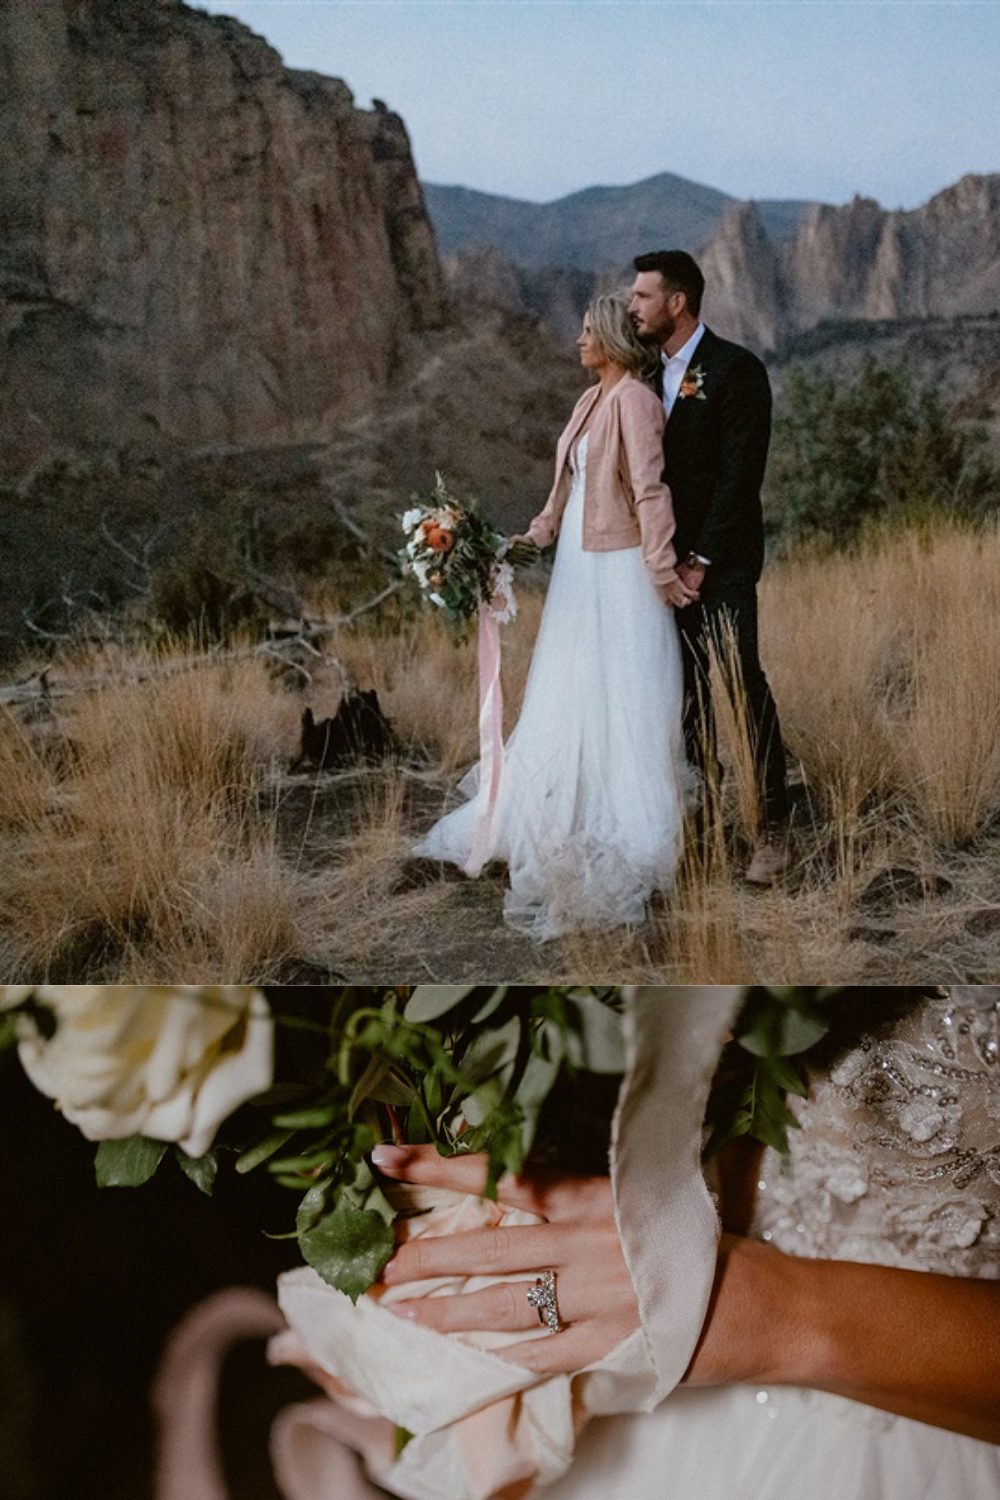 Bride and groom twilight photography post-ceremony wedding inspiration in Smith Rock State park elopement | Sun River Elopement, Destination Elopement Photographer, Smith Rock Elopement Inspiration, Oregon Elopement ideas, PNW Fall Wedding Inspiration, Fall Outdoor Wedding Ideas,Fall Wedding Inspiration, PNW Outdoor Wedding Ideas | chelseaabril.com